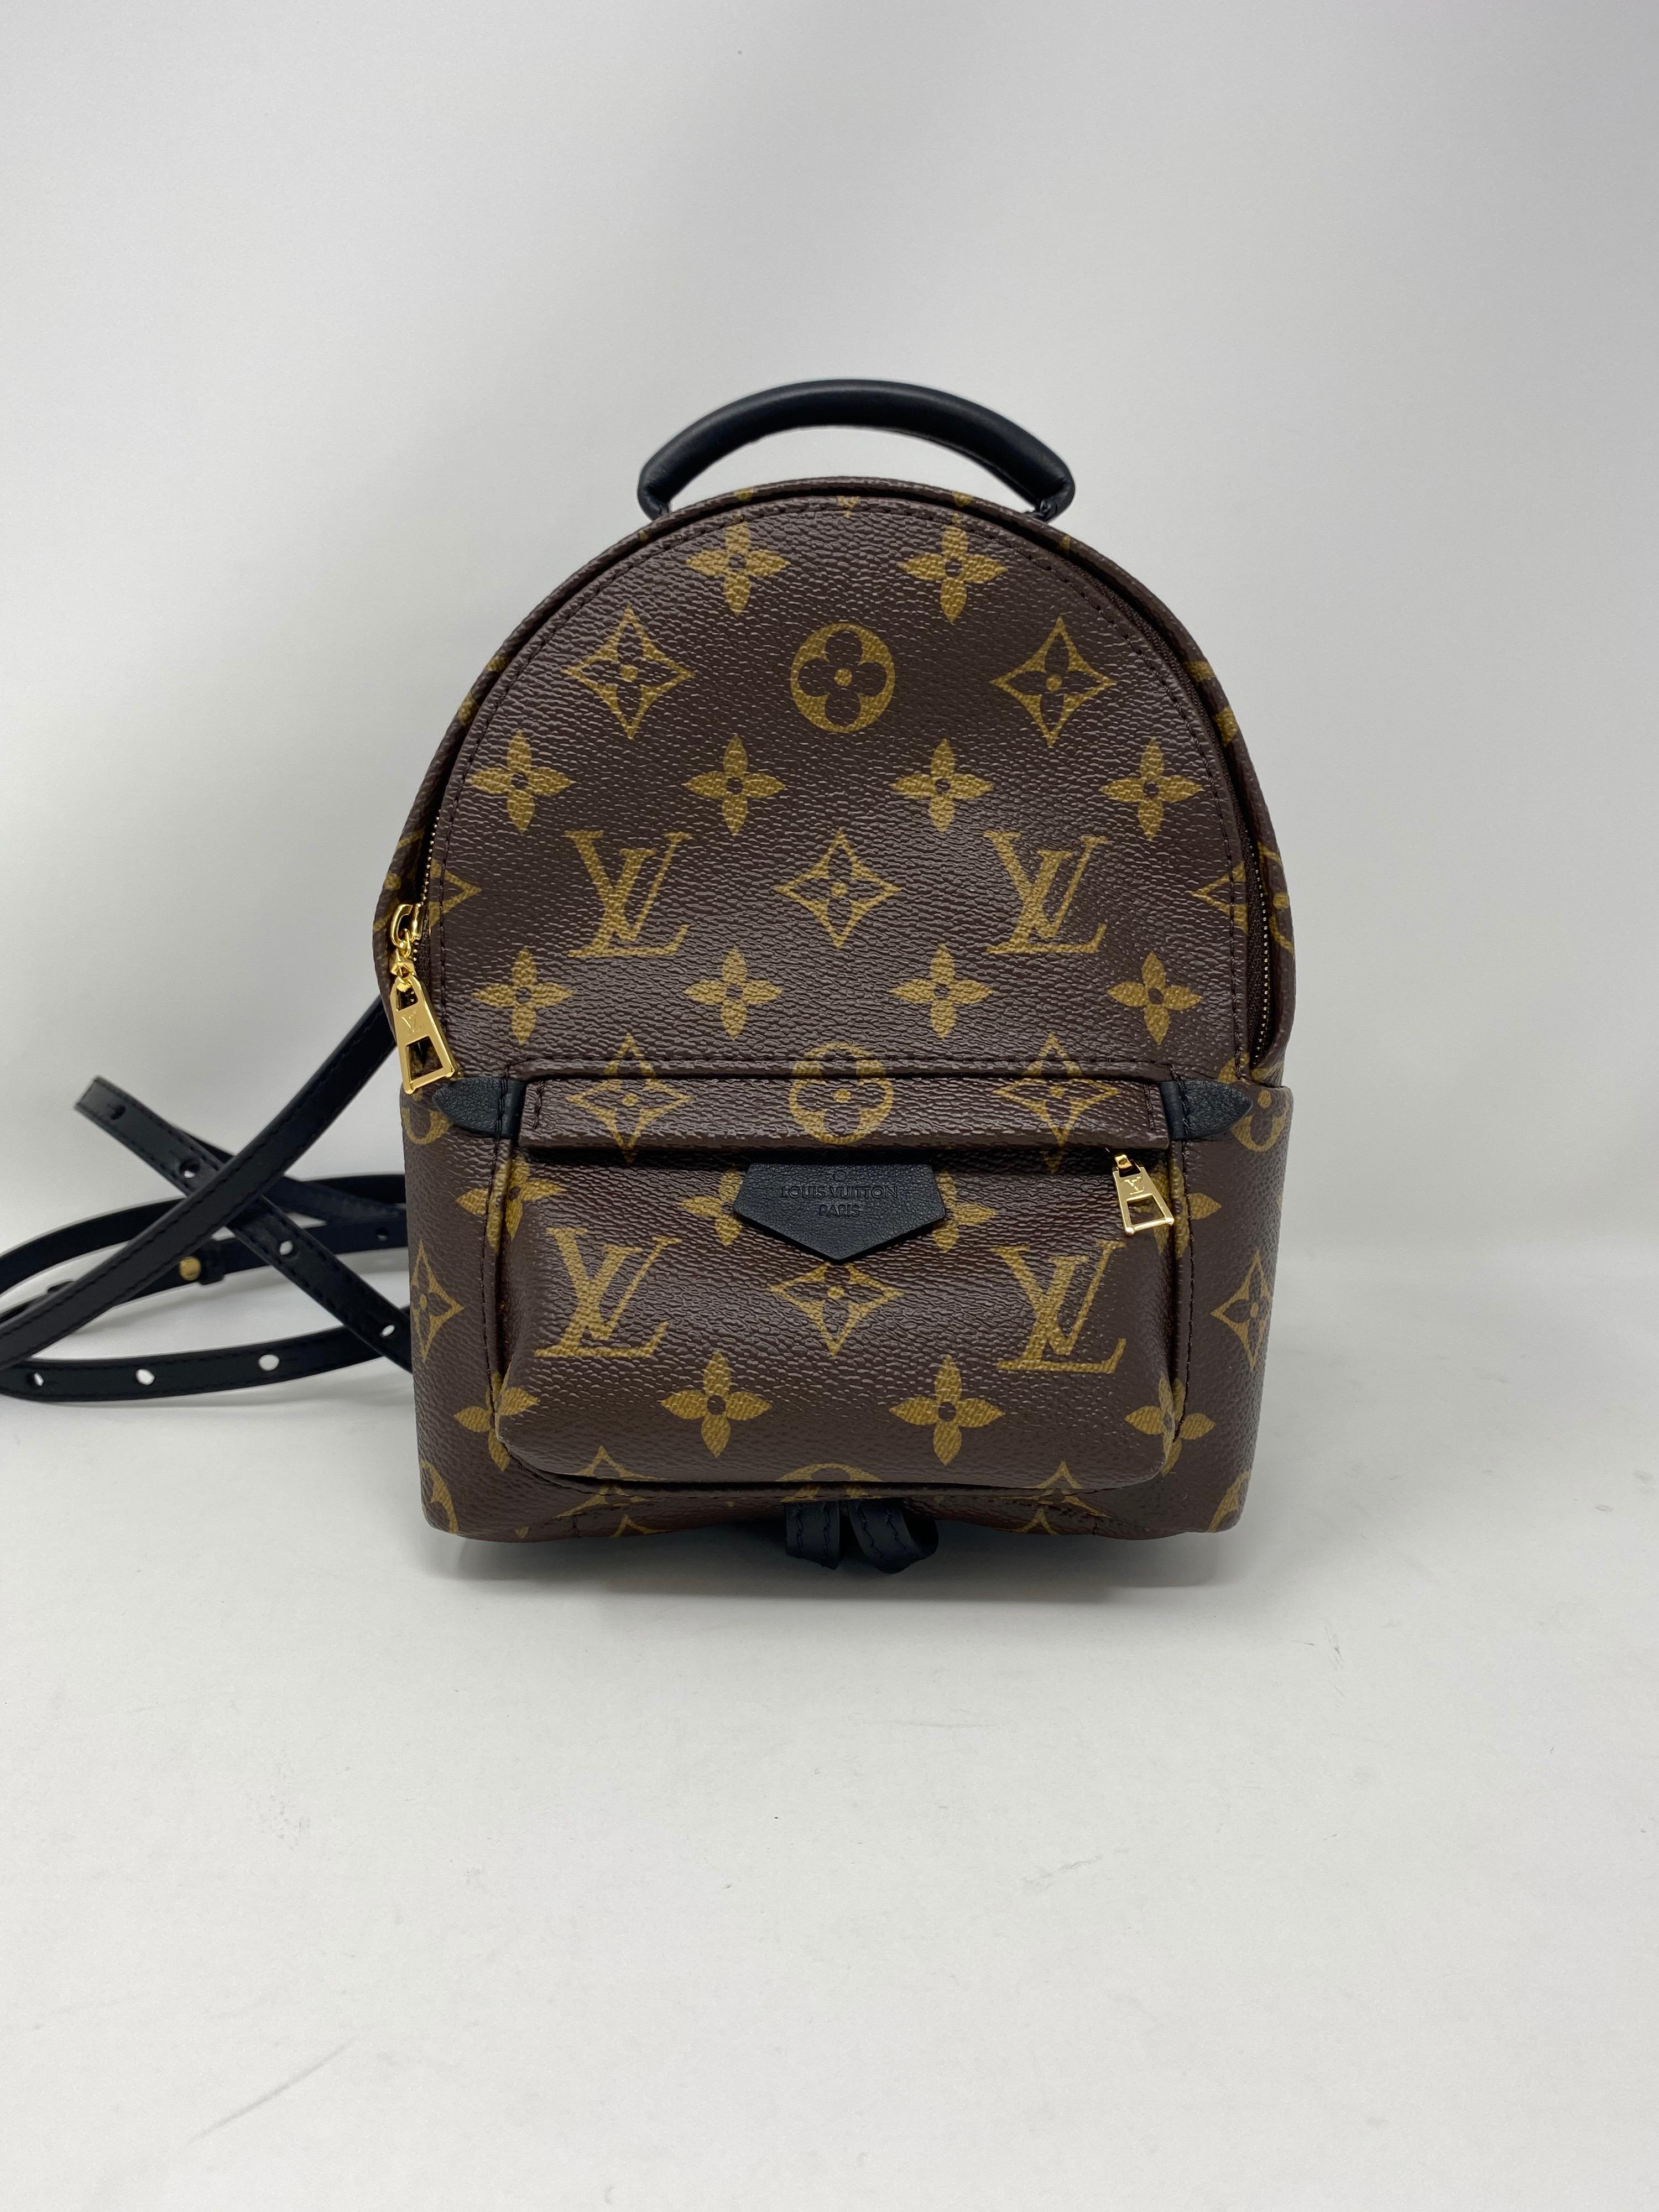 Louis Vuitton Mini Palm Springs Backpack. Brand new and never used. Includes dust cover, original tag and booklet. Guaranteed authentic. 